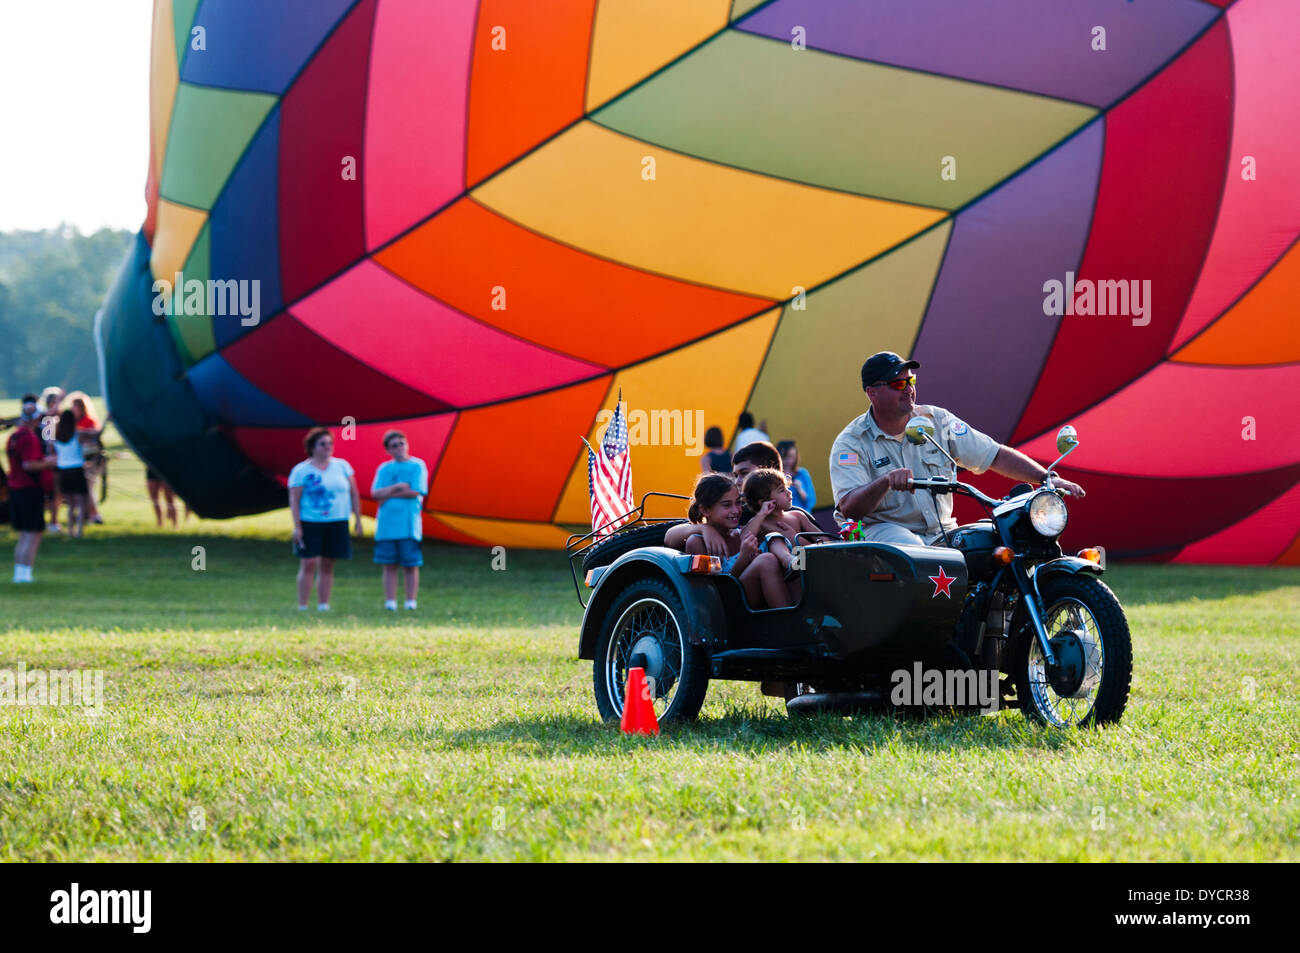 A man giving children rides on a vintage military motorcycle with sidecar at a hot air balloon festival in  Bealeton Virginia. Stock Photo